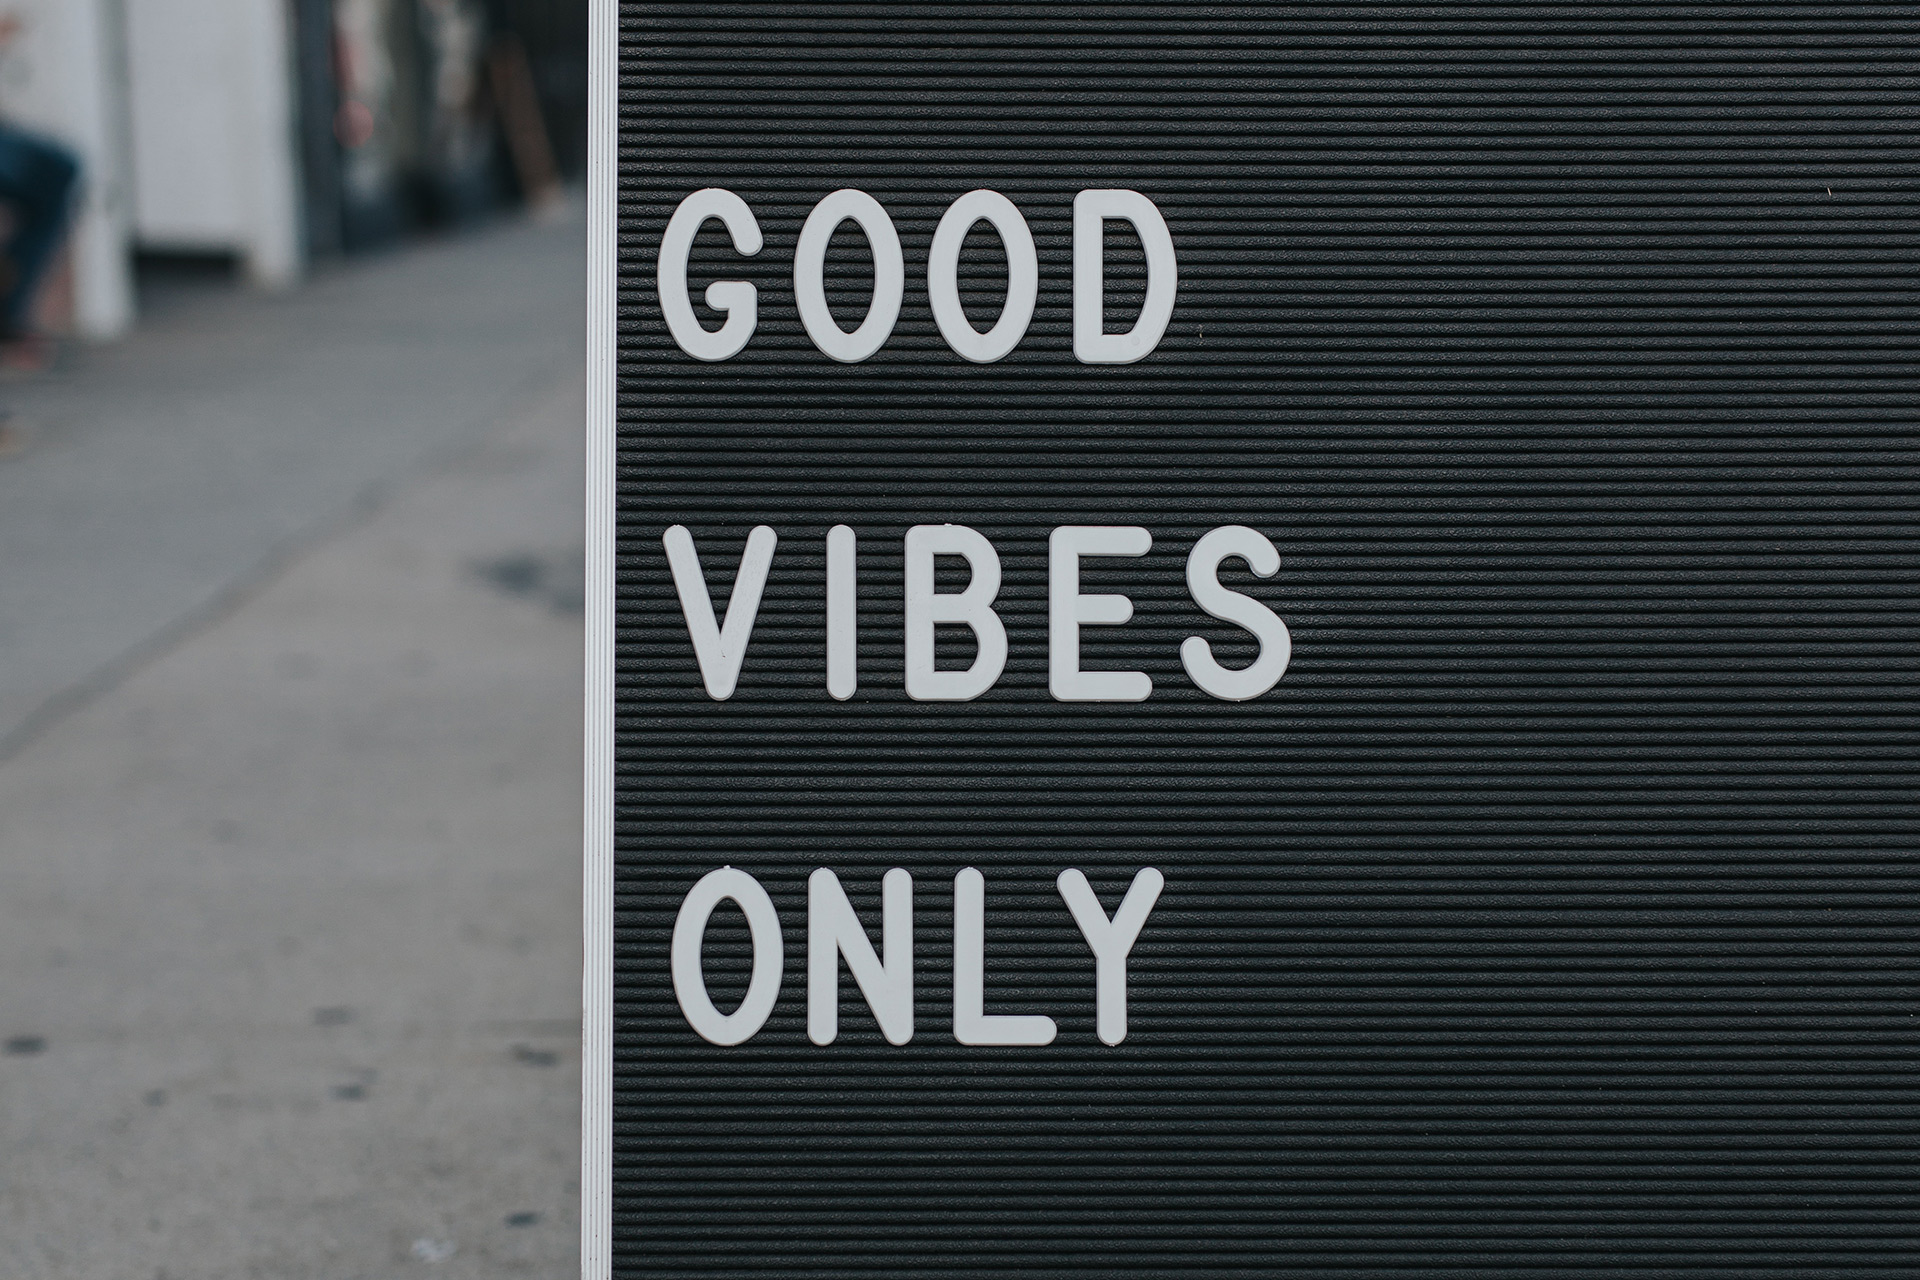 Signboard standing on the street with a sign that says Good Vibes Only.